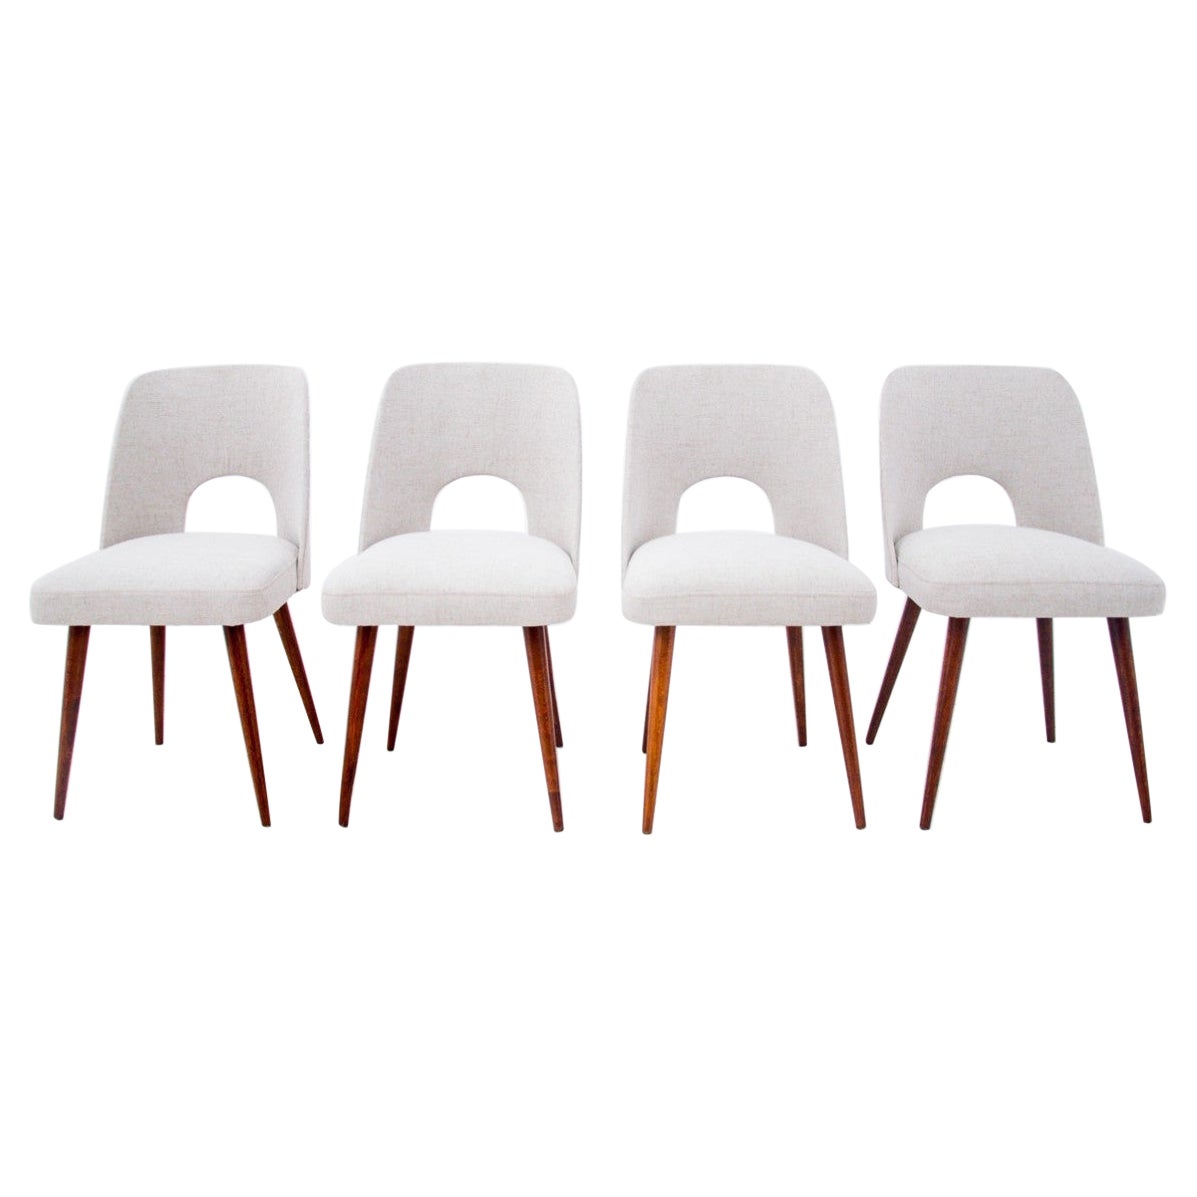 Set of four beige midcentury vintage chairs, Poland, 1960s. For Sale